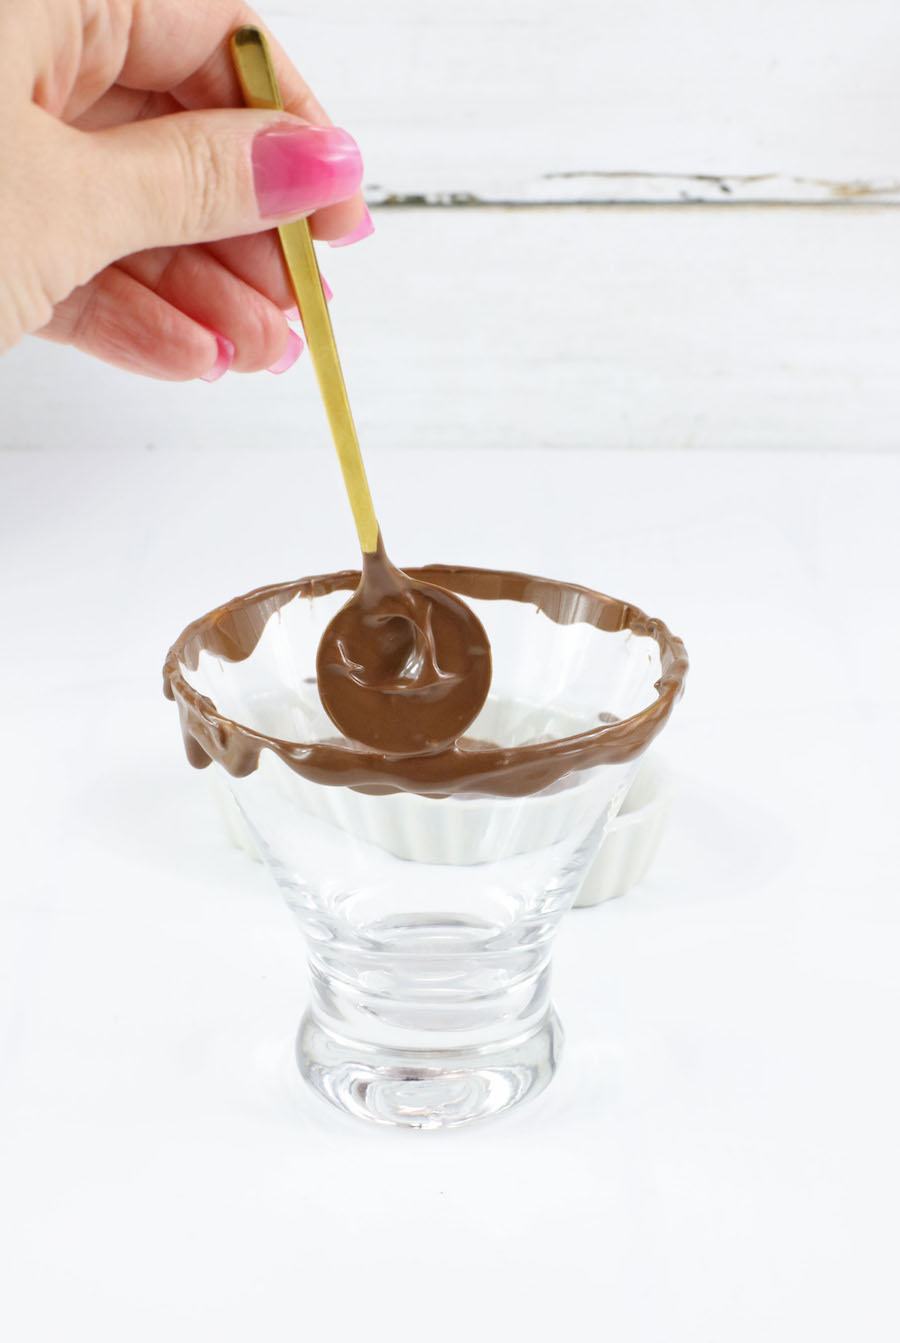 using spoon to put melted chocolate on rim of glass